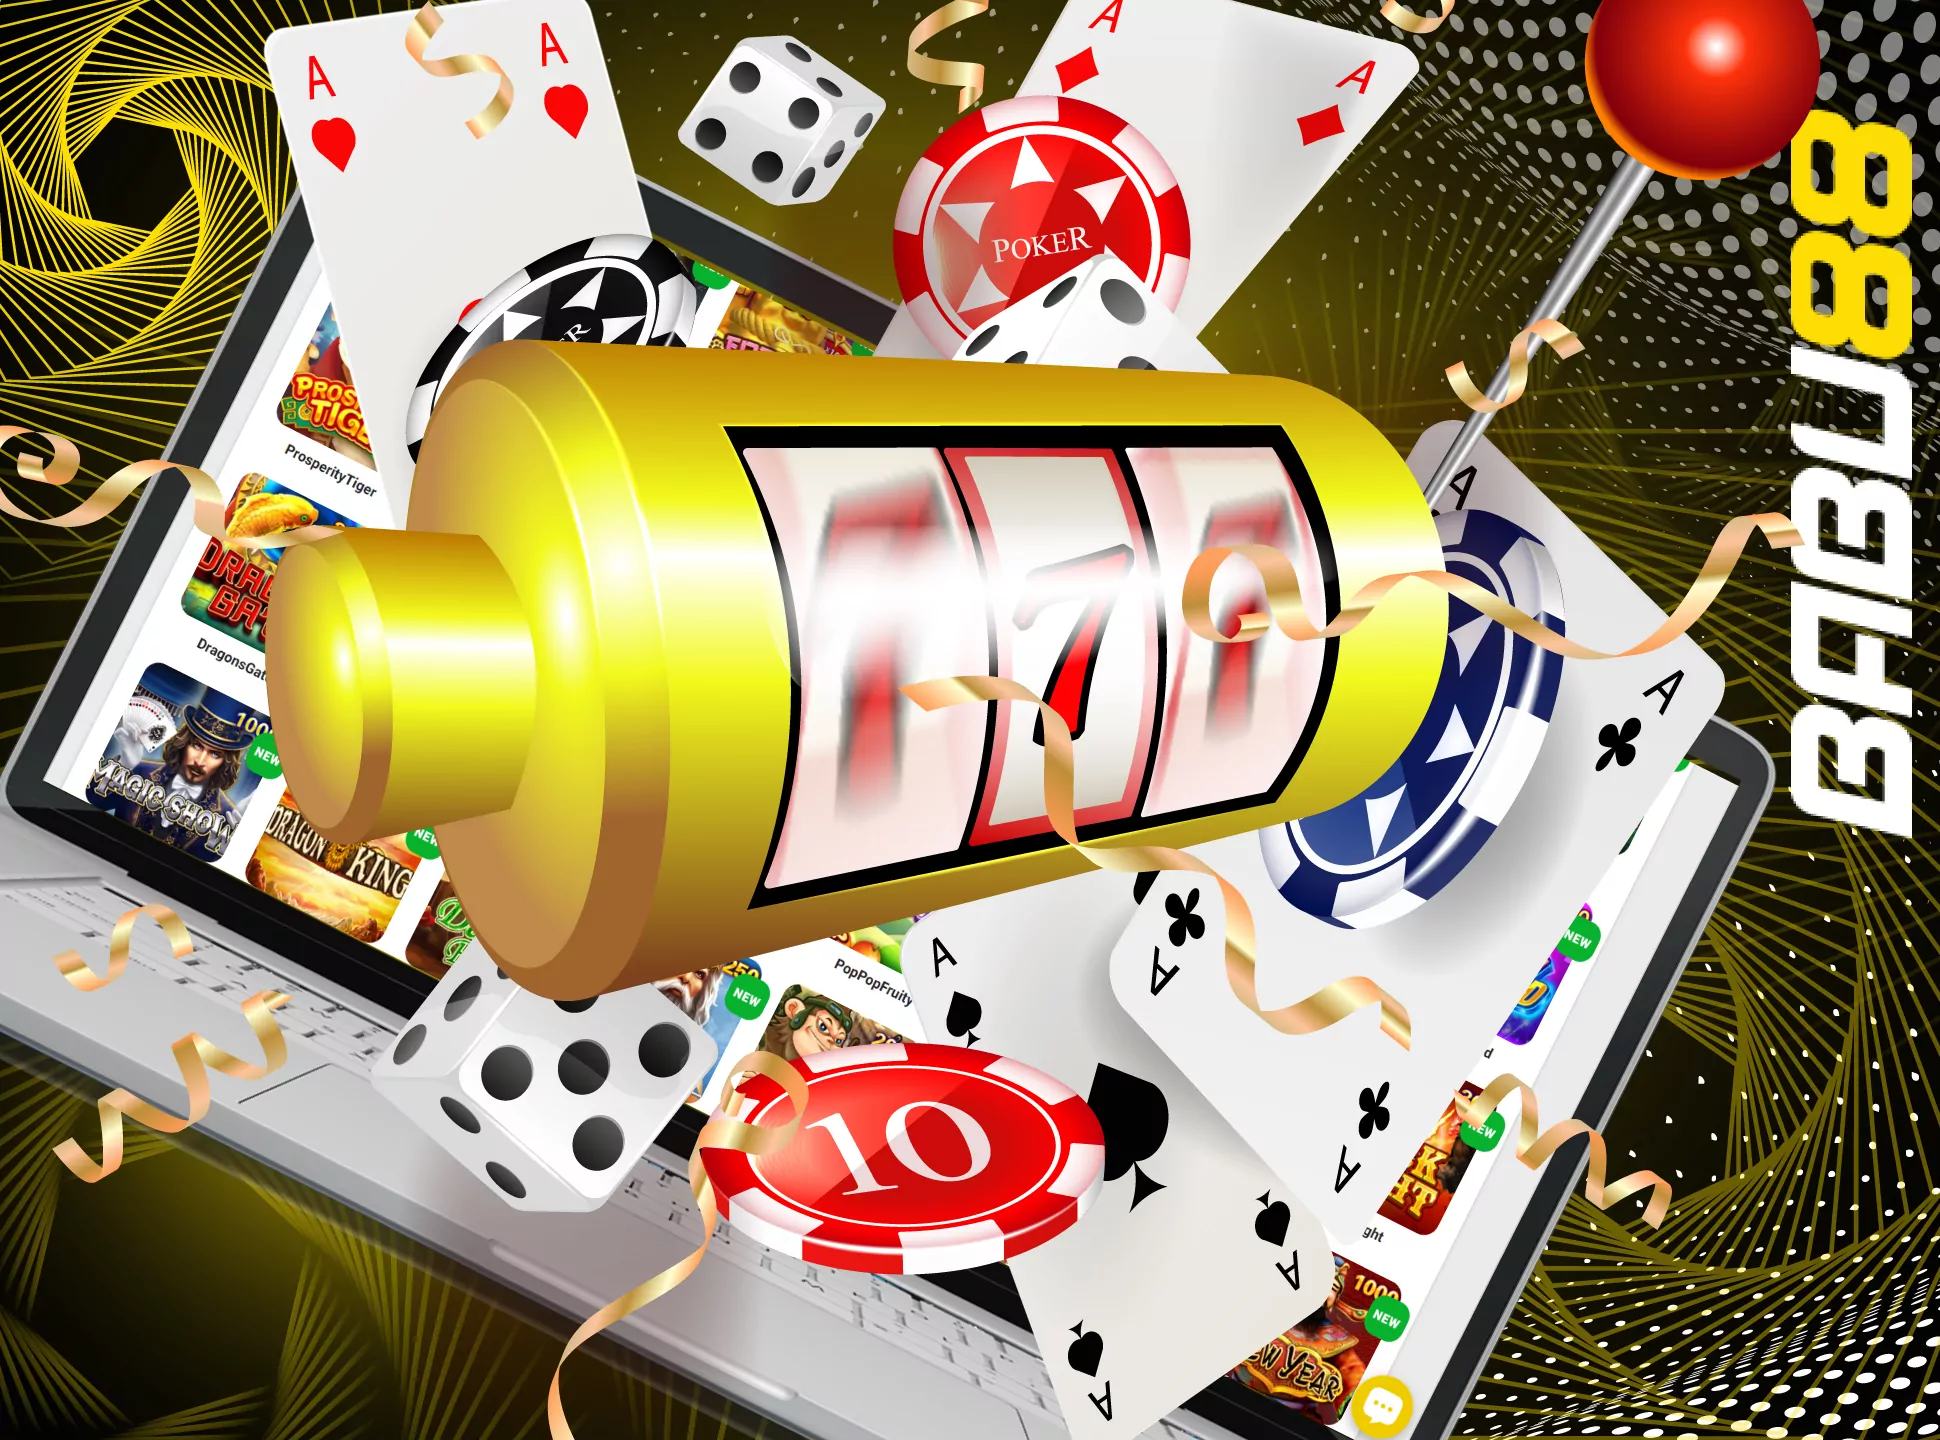 There are many slots on different topics in the Babu88 casino.